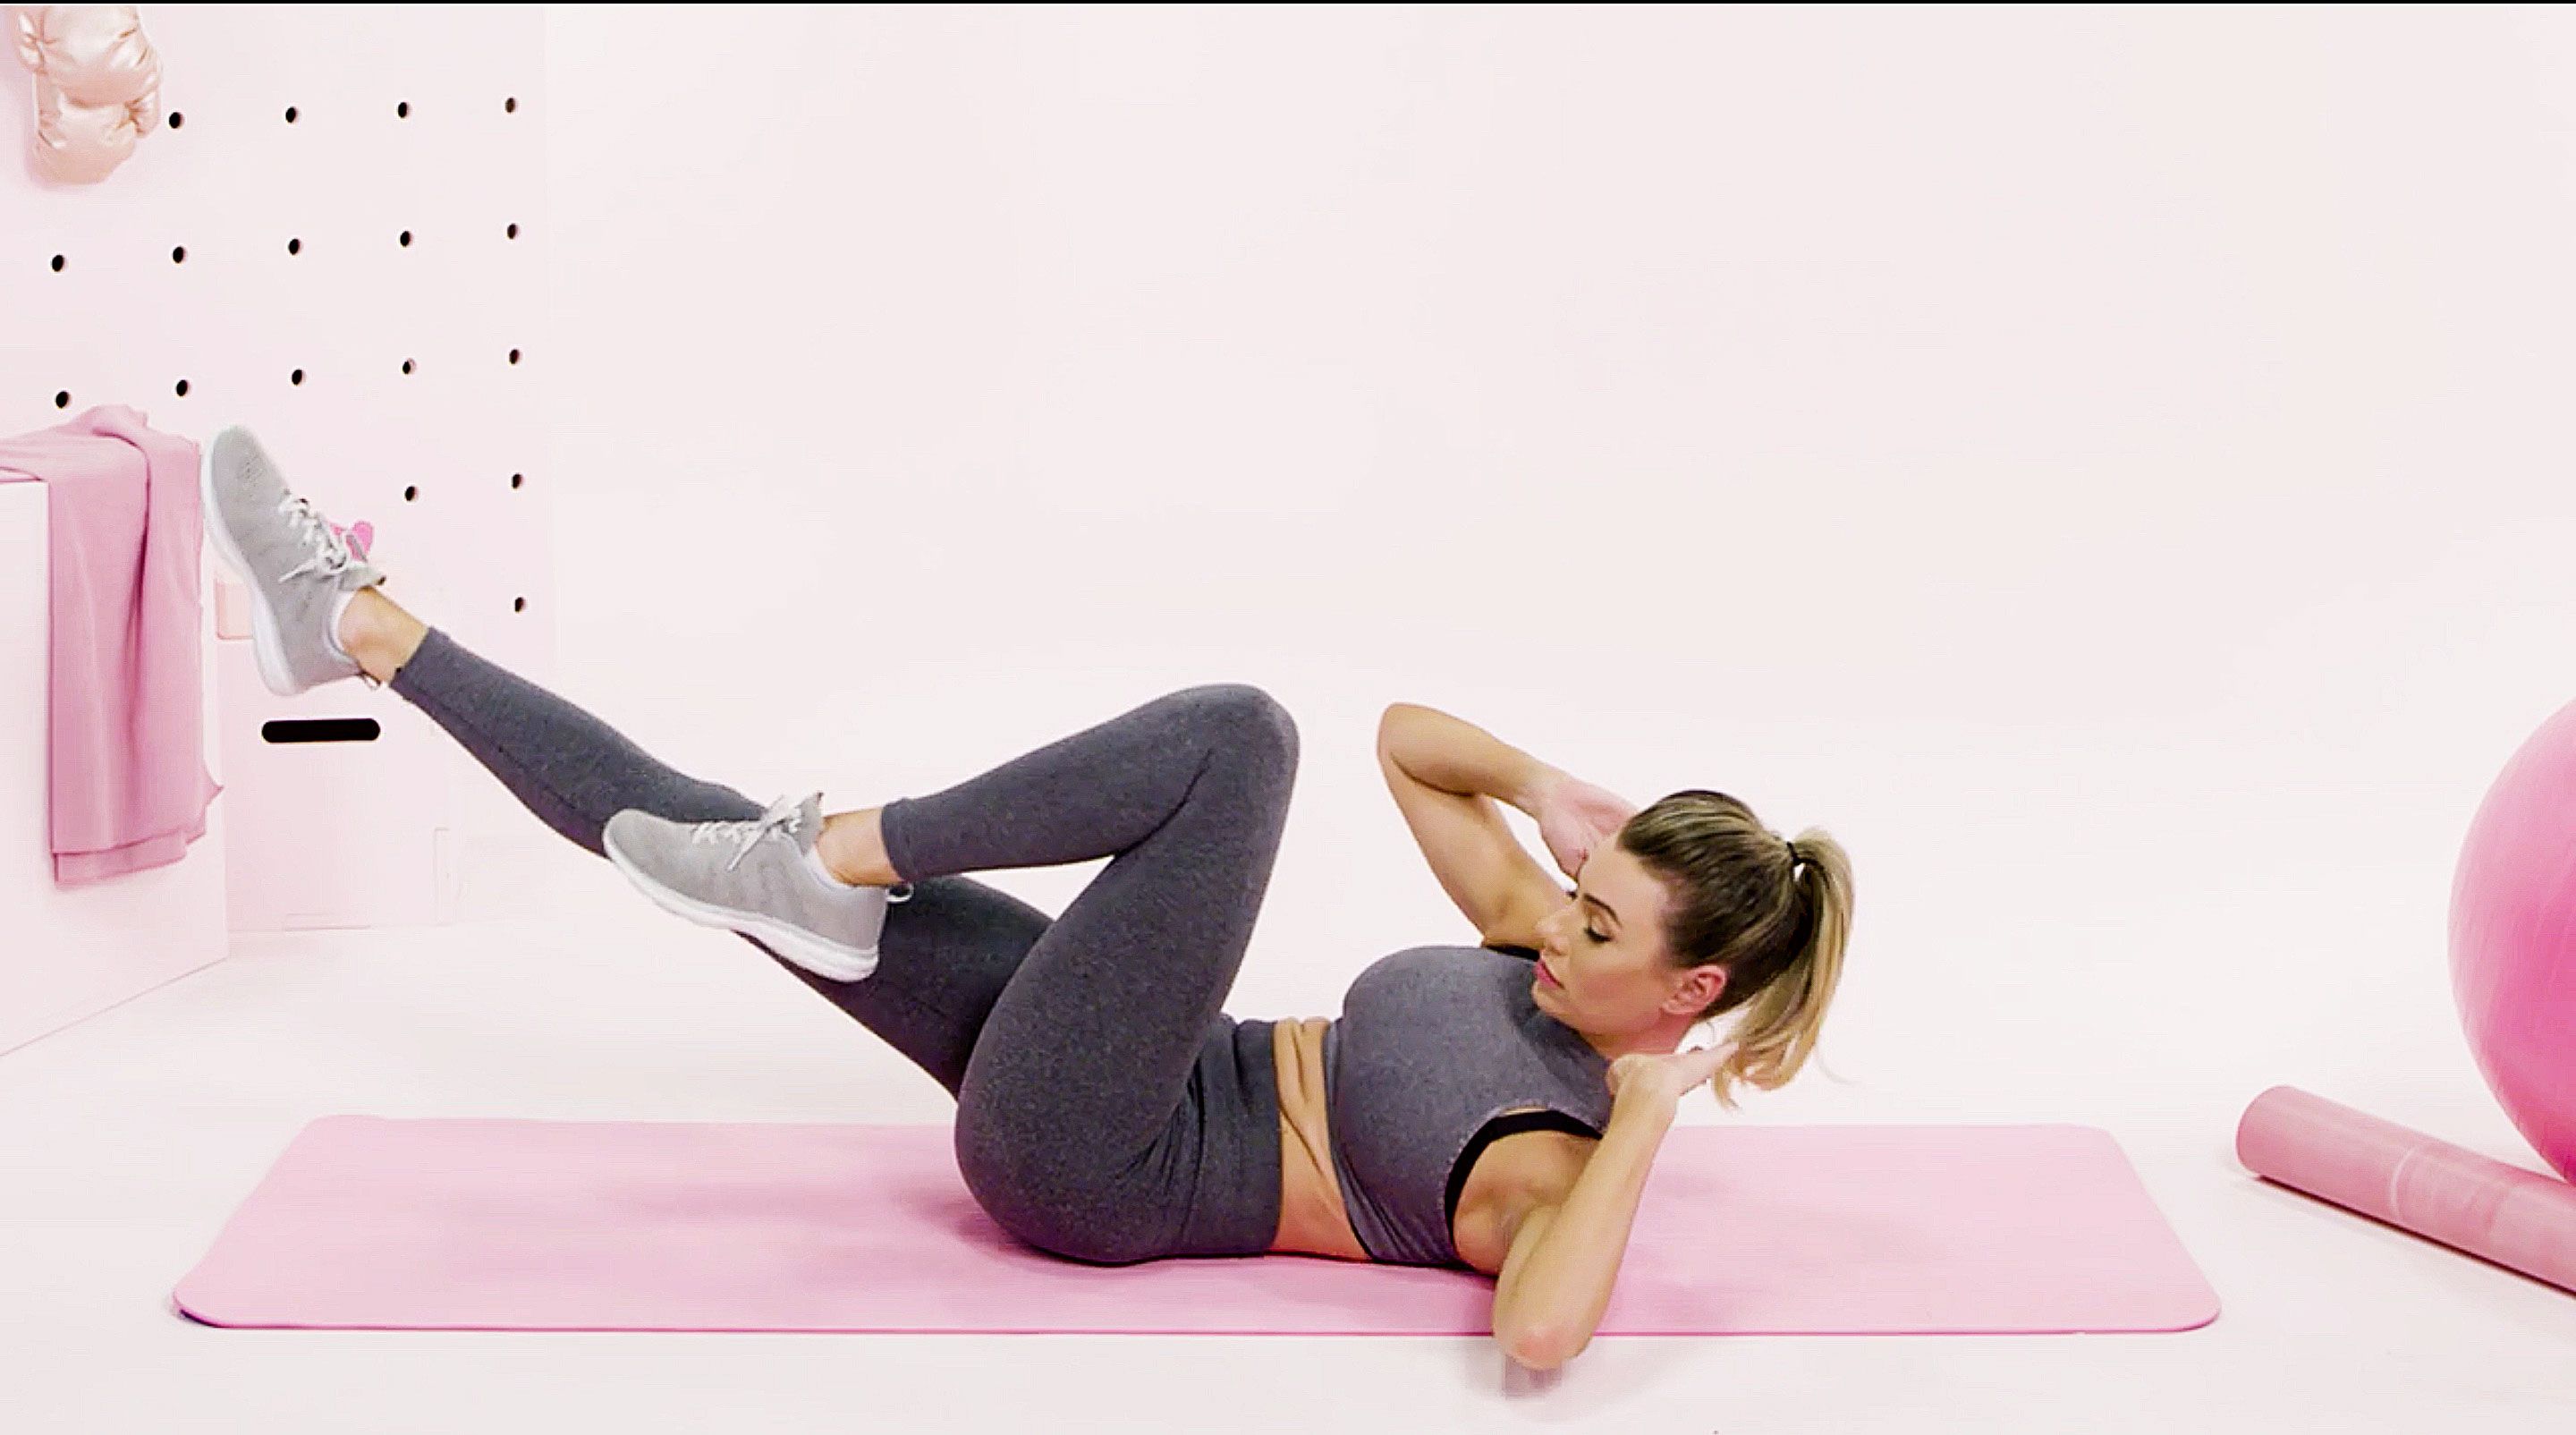 How To Do Bicycle Crunches For Great Abs-Sculpting Benefits